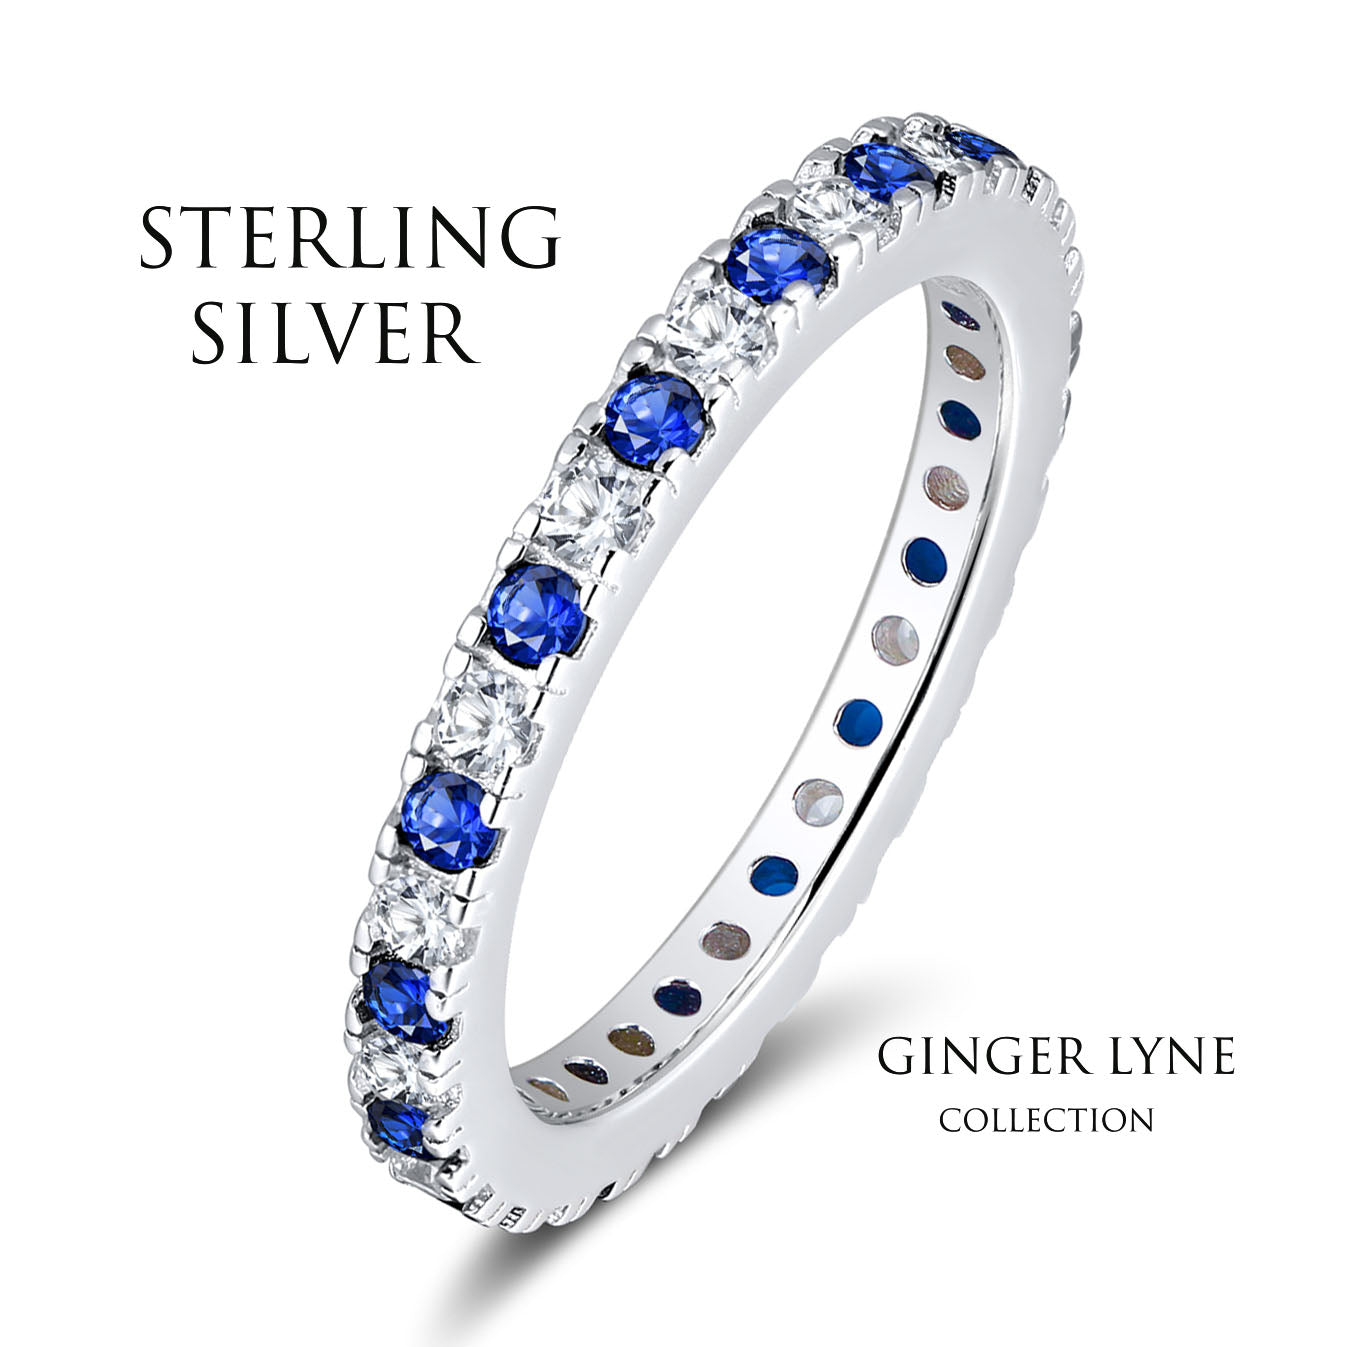 Eternity Band Wedding Ring for Women Blue Cz Sterling Silver Ginger Lyne Collection - 6